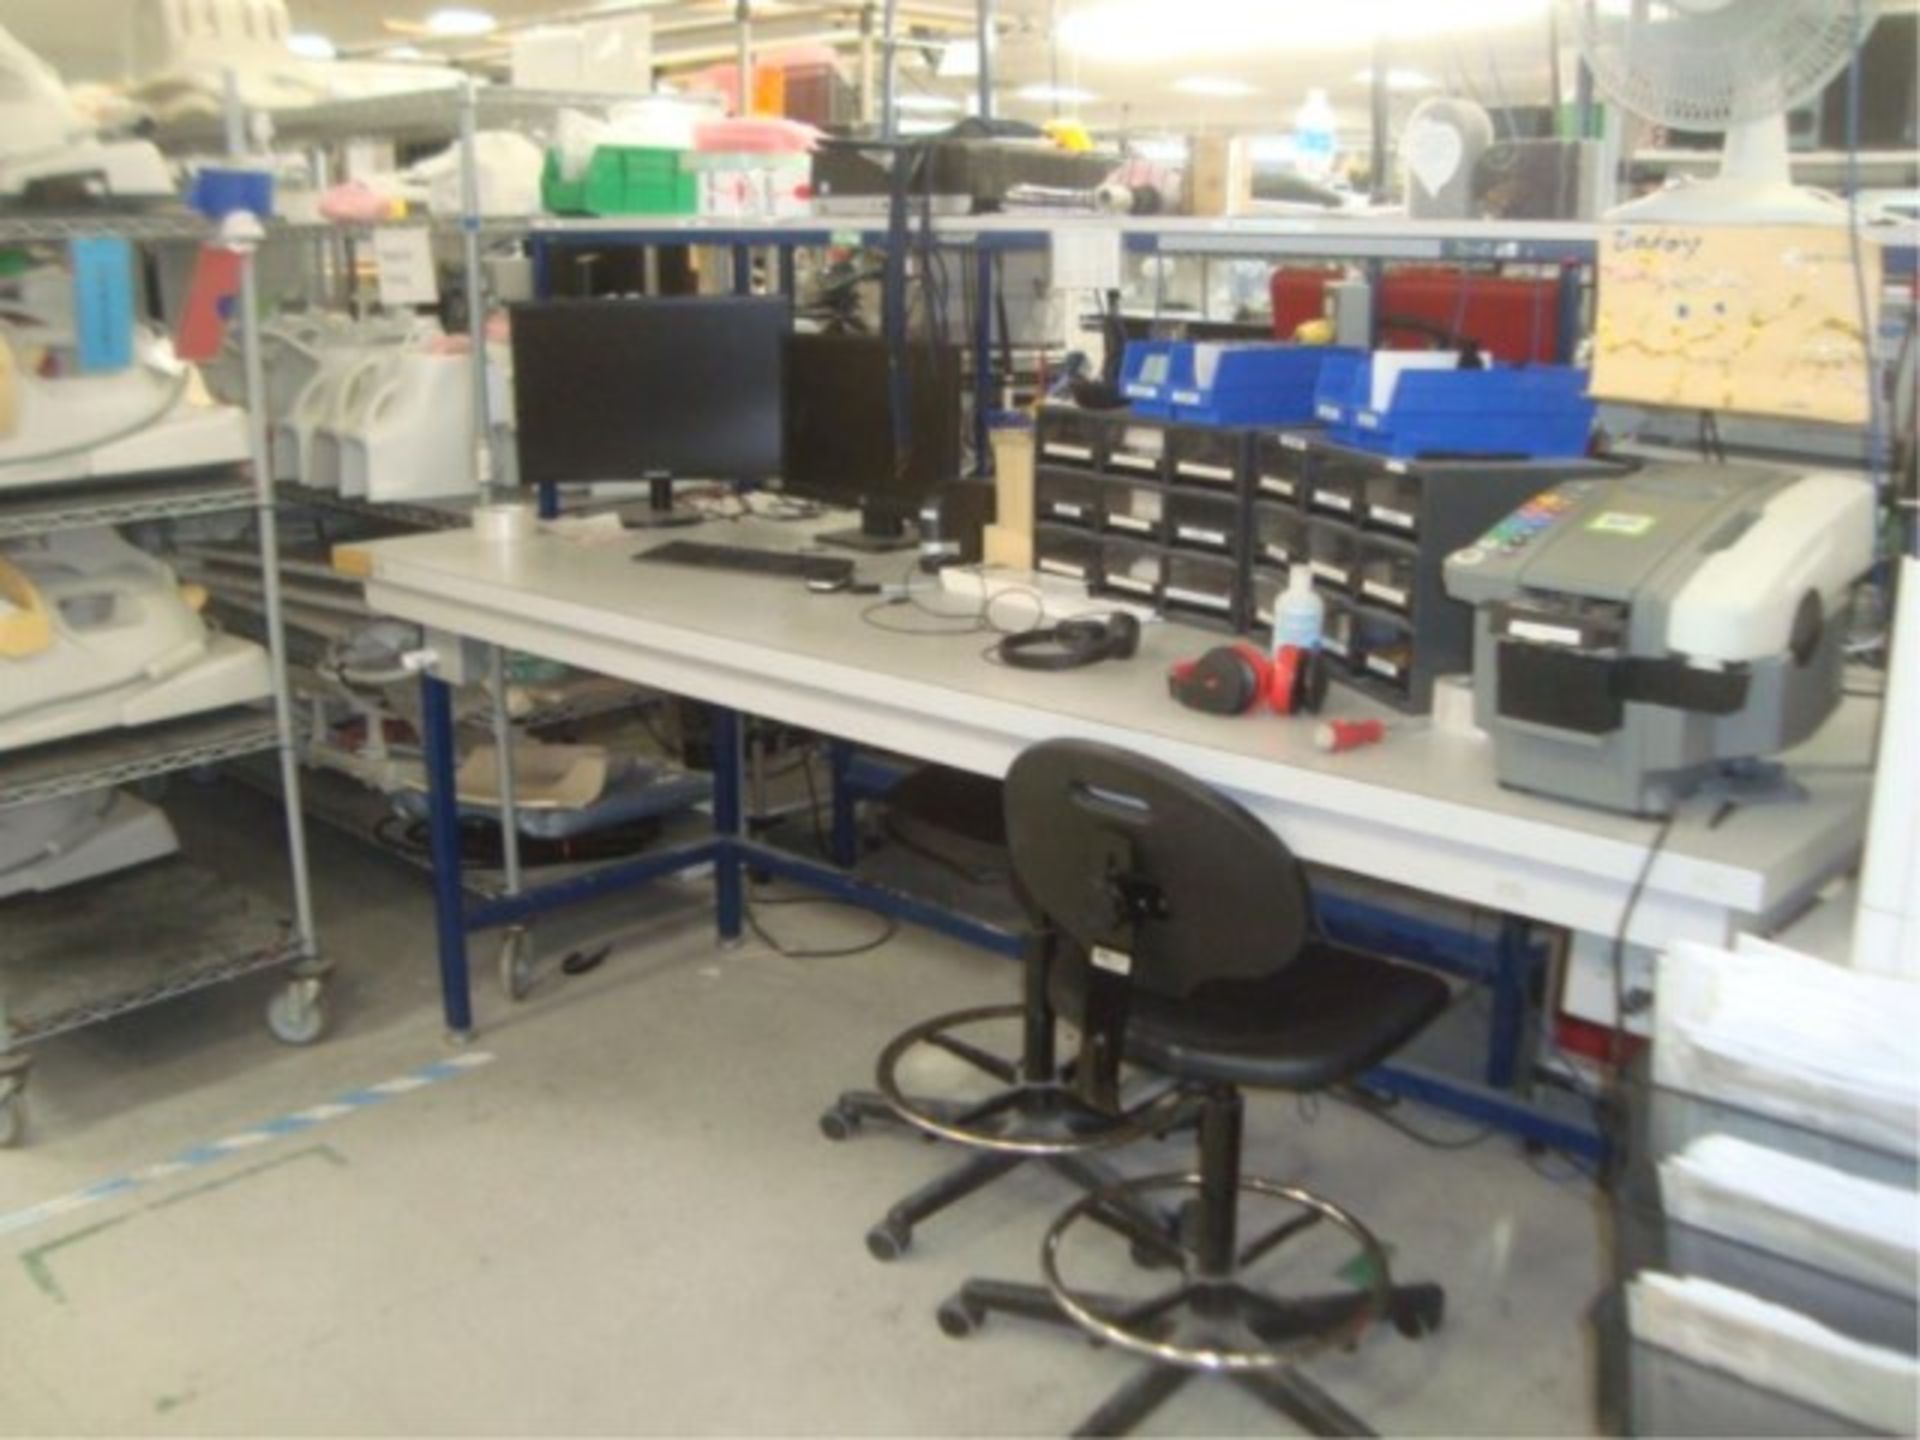 Heavy Duty Workstation Benches - Image 7 of 9